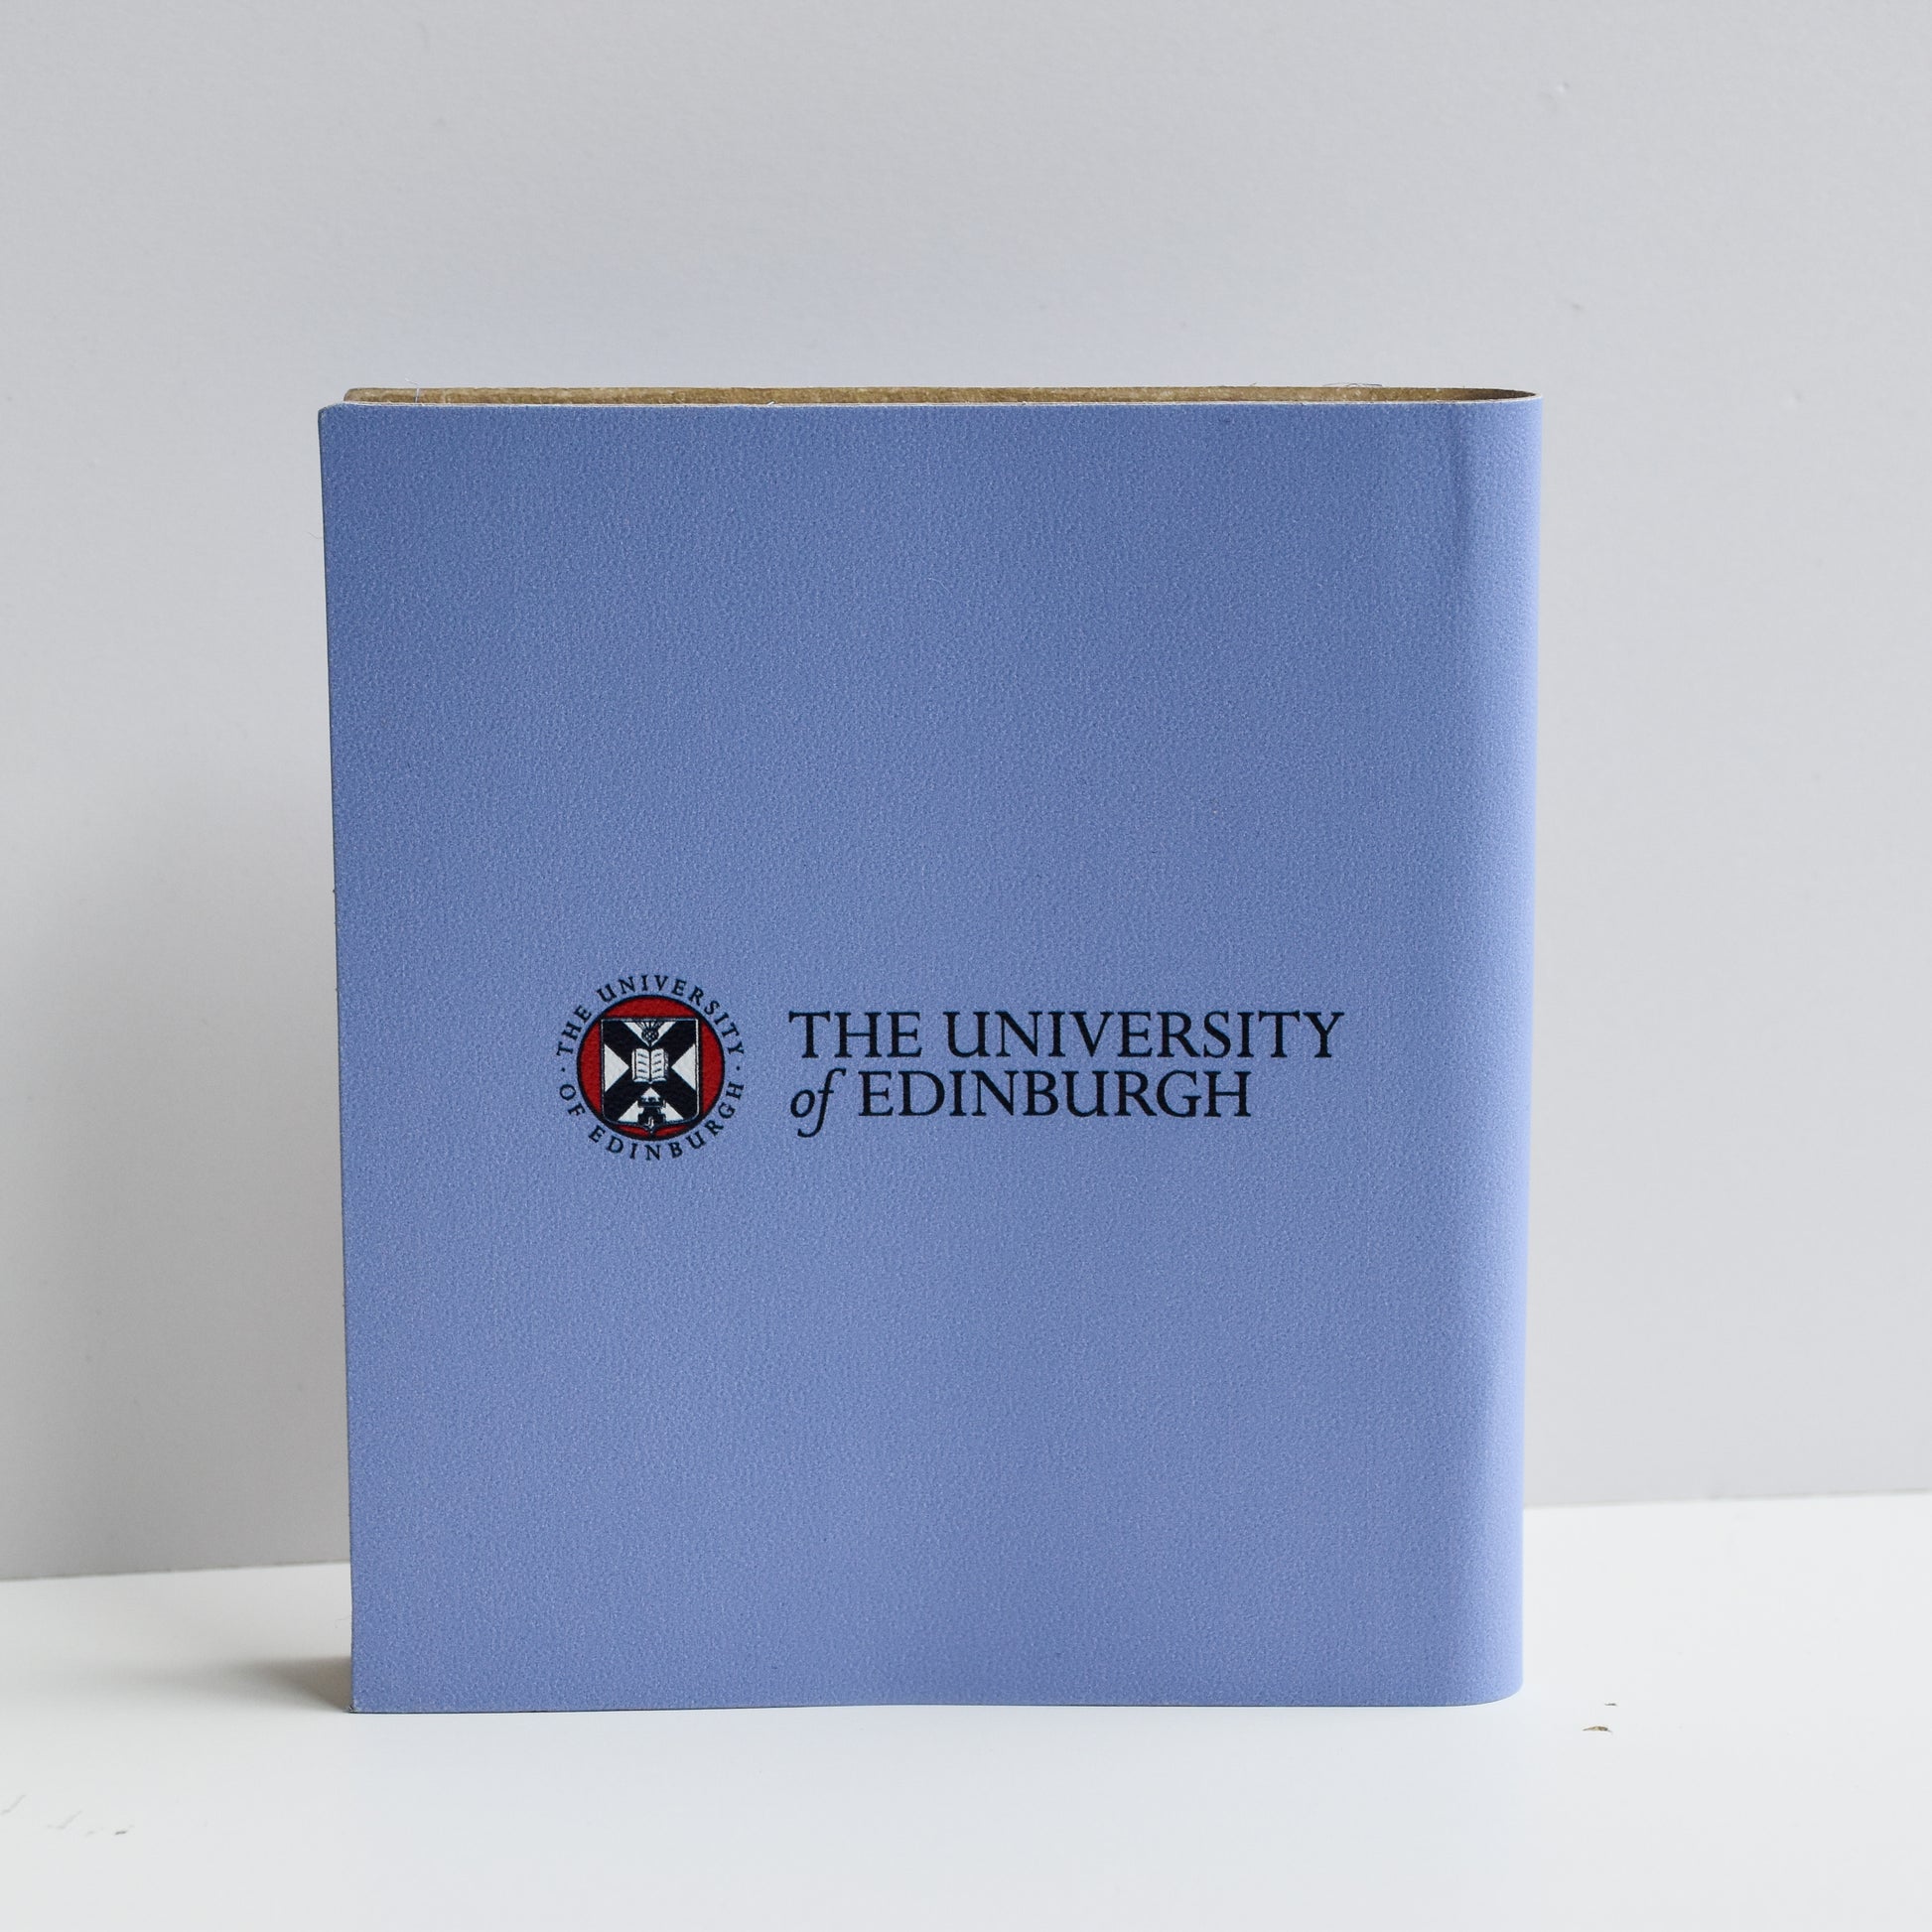 A close up of the Graduation Day Notebook back cover. It is blue with the University of Edinburgh crest, and 'The University of Edinburgh' in black text to the right of it in the centre of the cover.